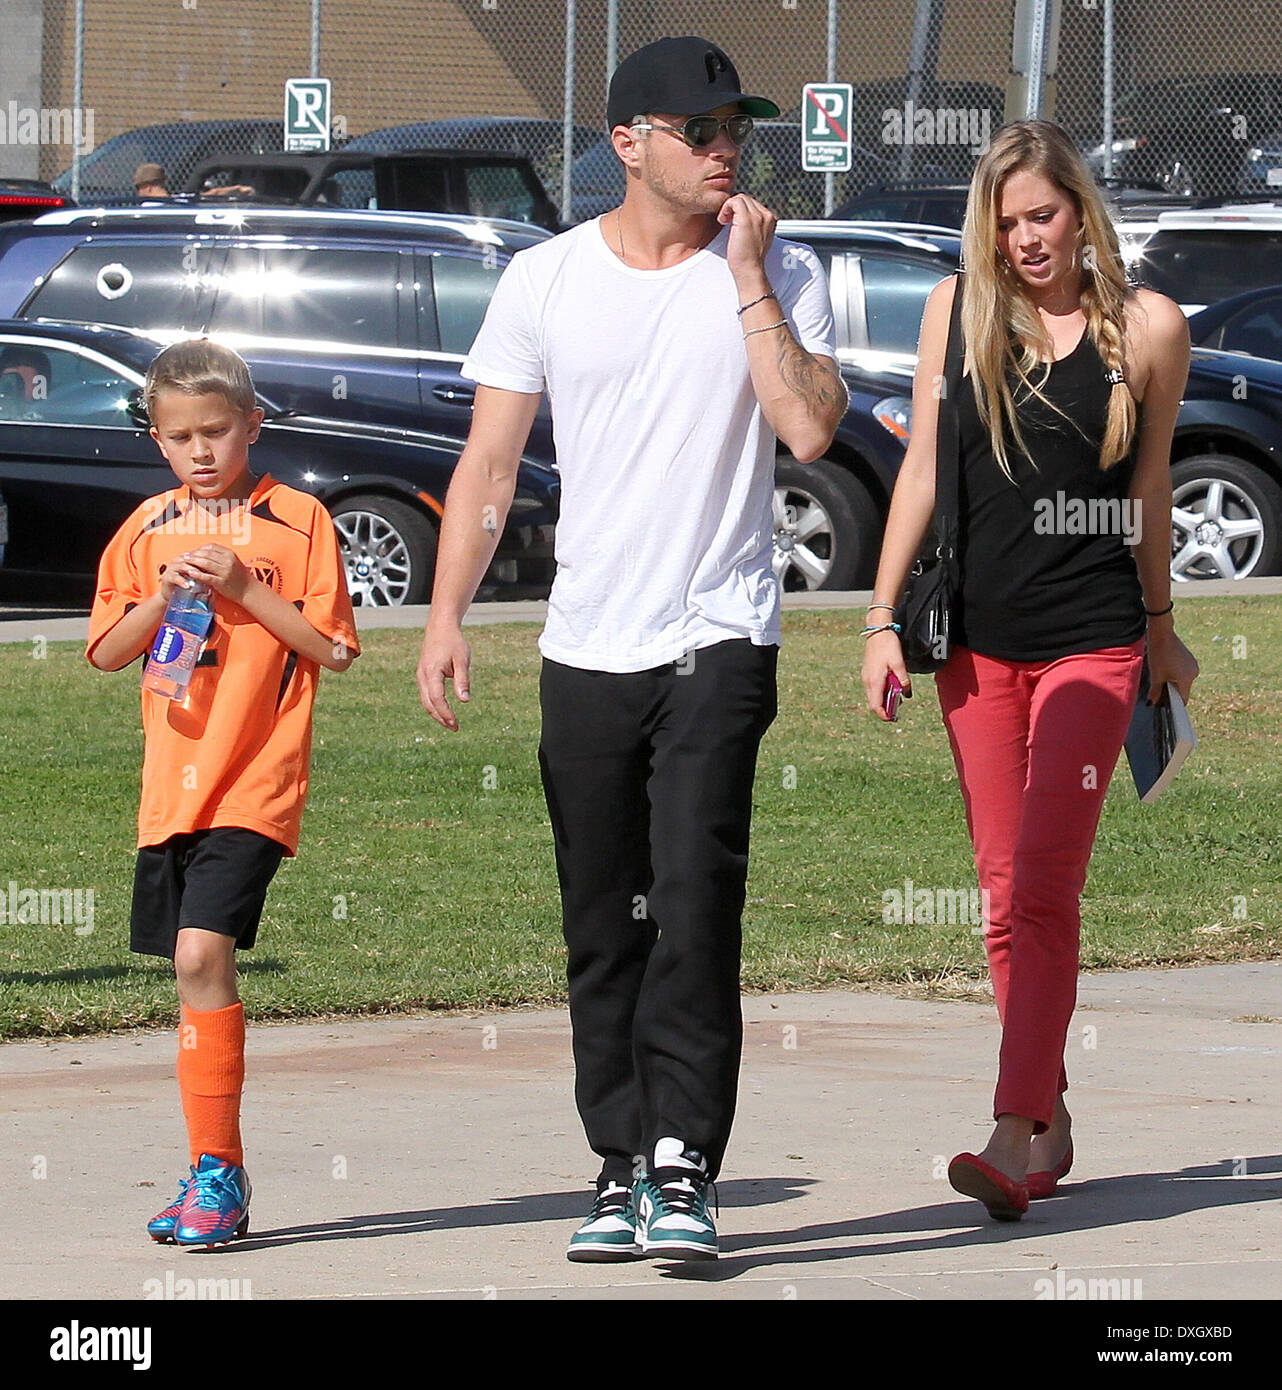 Deacon Phillippe, Paulina Slagter, Ryan Phillippe Ryan Phillippe at a park in Brentwood with his girlfriend to watch his son's soccer game Los Angeles, California - 03.11.12 Featuring: Deacon Phillippe,Paulina Slagter,Ryan Phillippe Where: United States When: 03 Nov 2012 Stock Photo